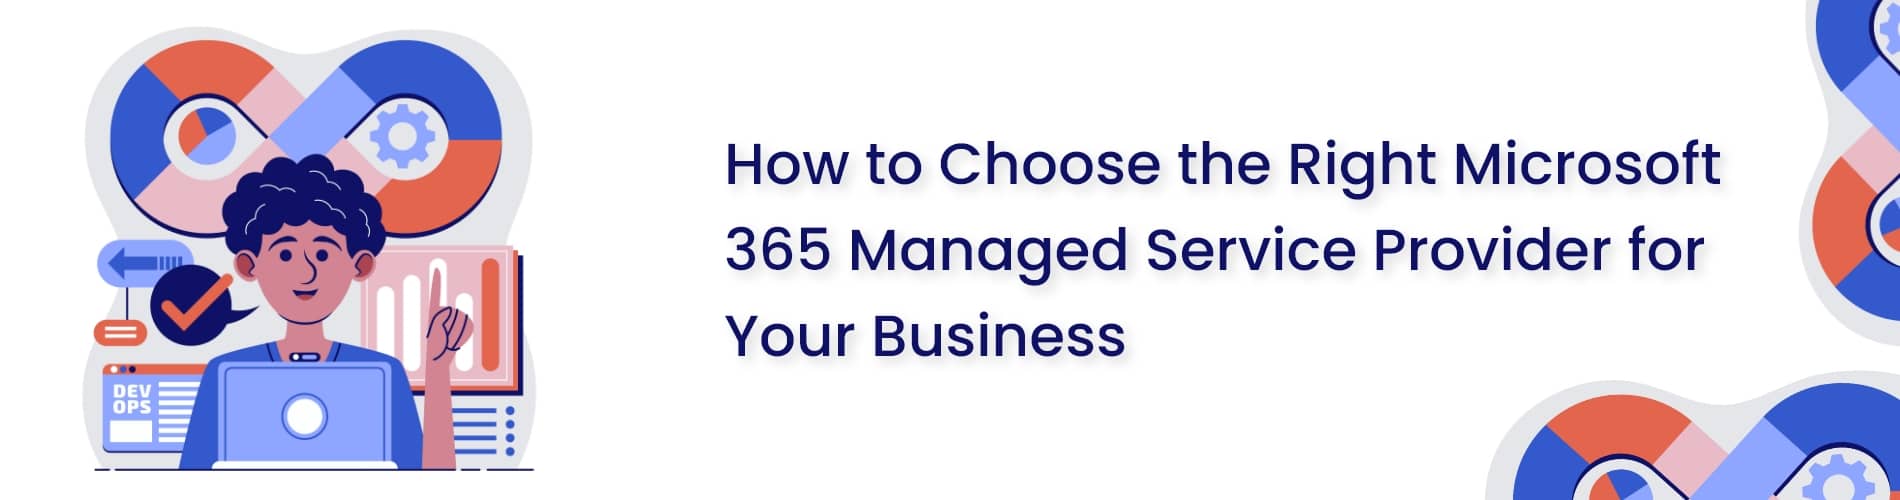 Which Microsoft 365 Features Are Ideal for Project Management?